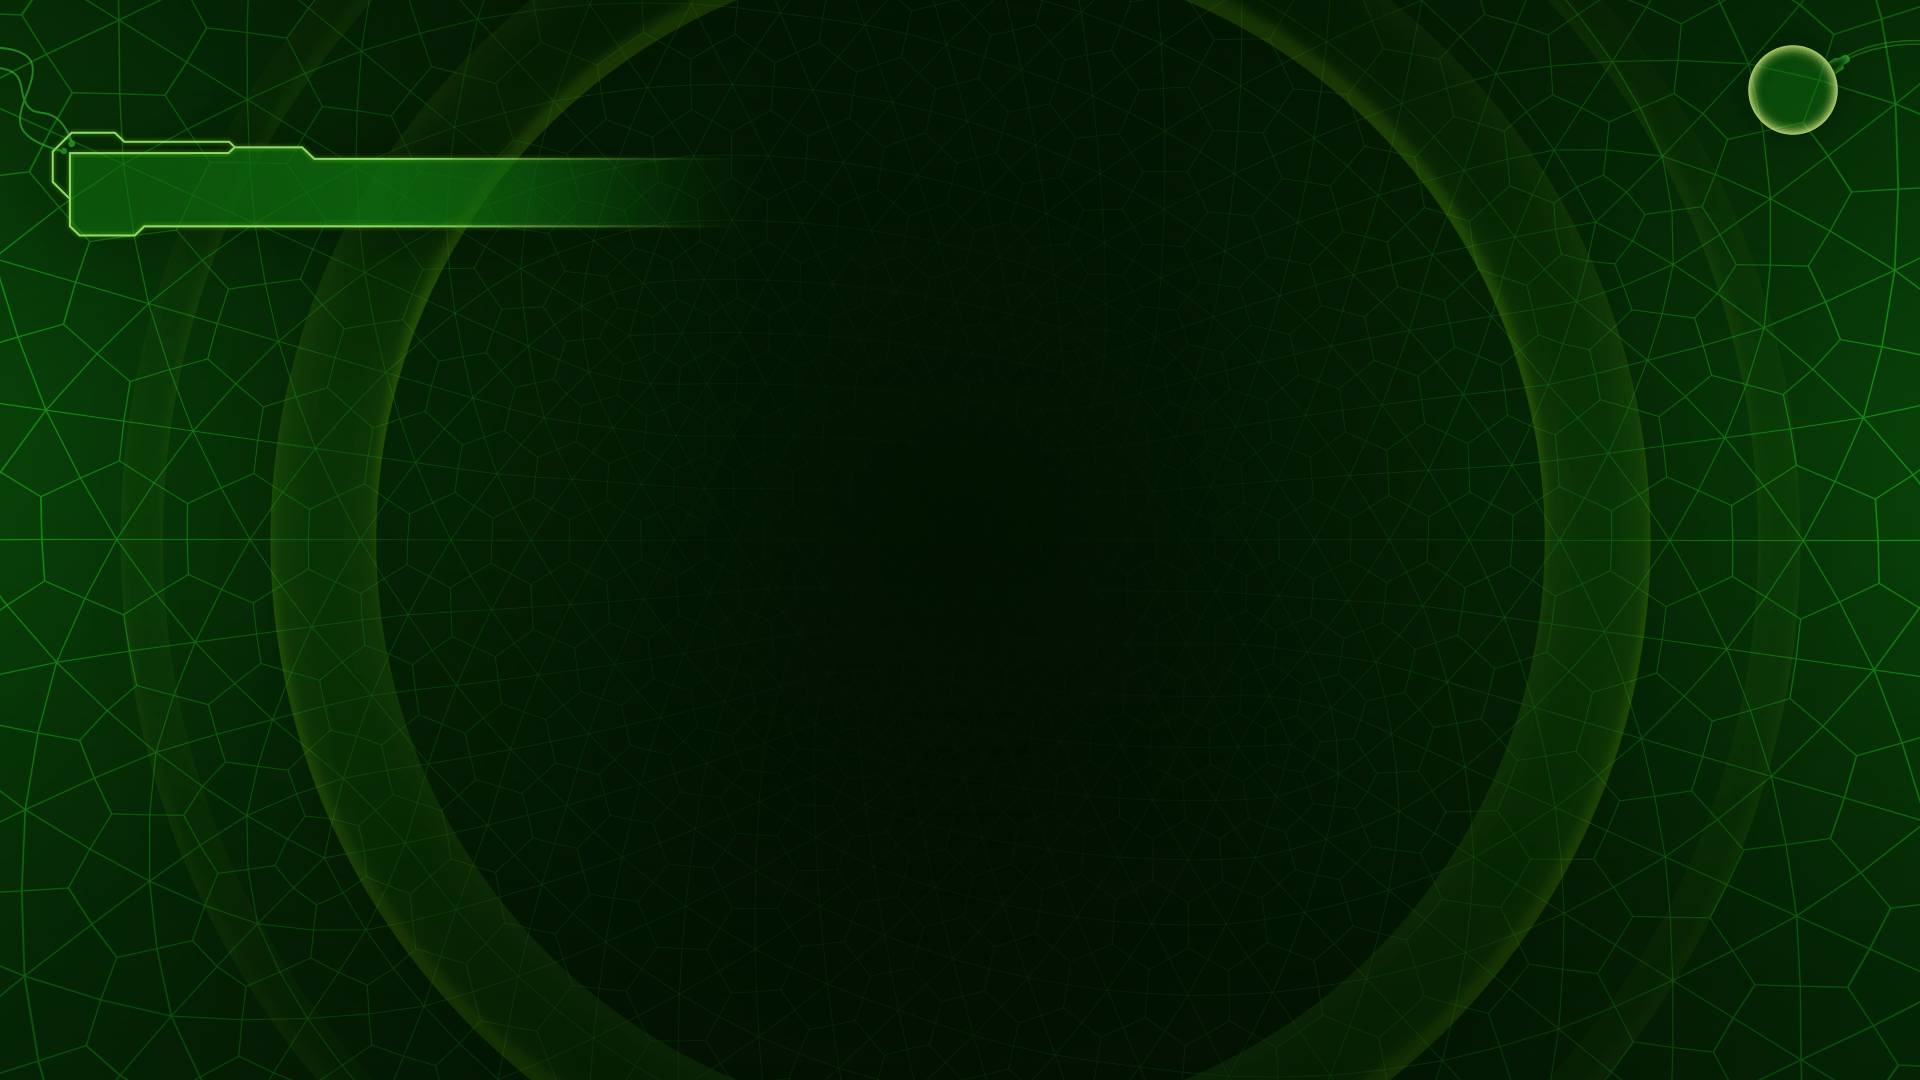 Original Xbox Logo - OG-style Xbox logo/hex grid theme (with second revision in comments ...